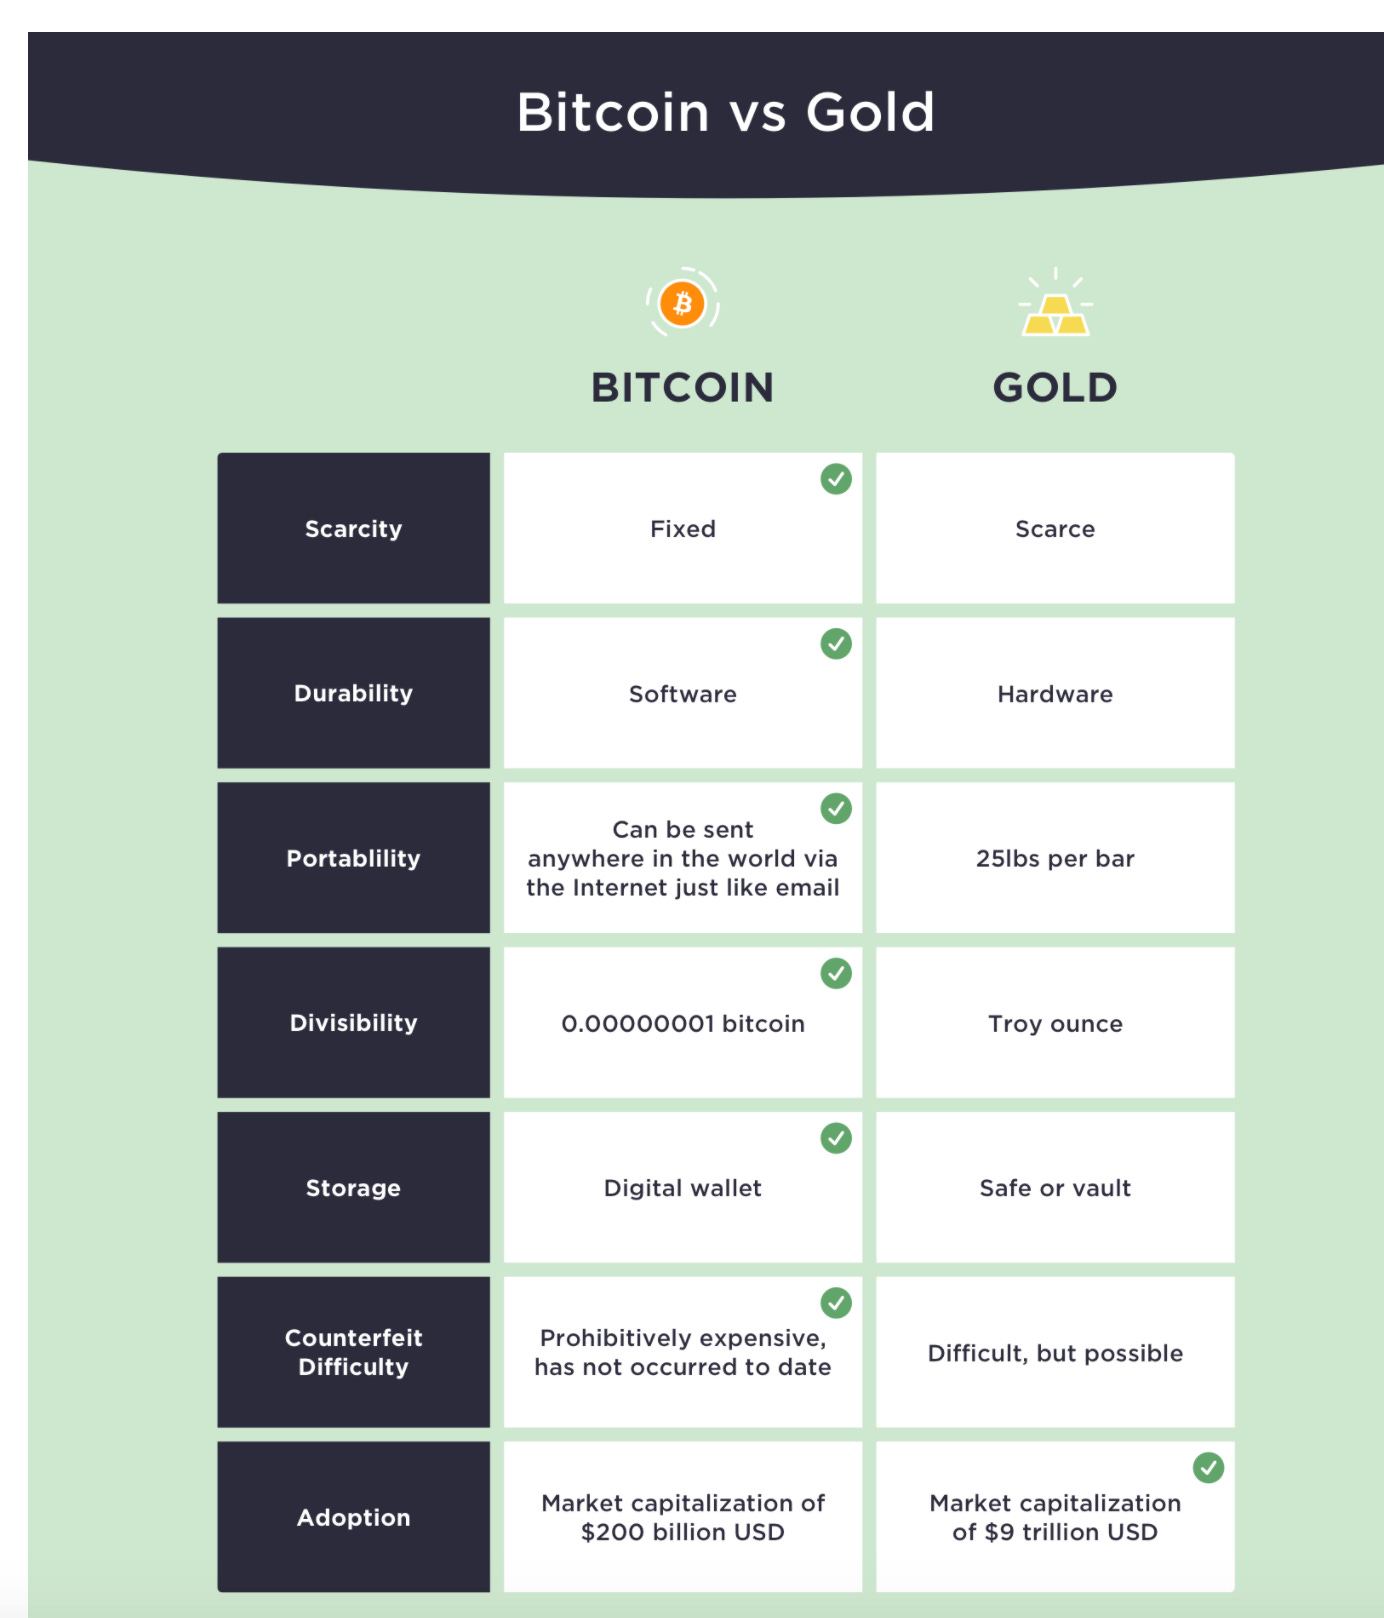 cryptocurrency - If Bitcoin becomes a globally accepted store of value,  would it be liable to the same problems that mired the gold standard? -  Economics Stack Exchange